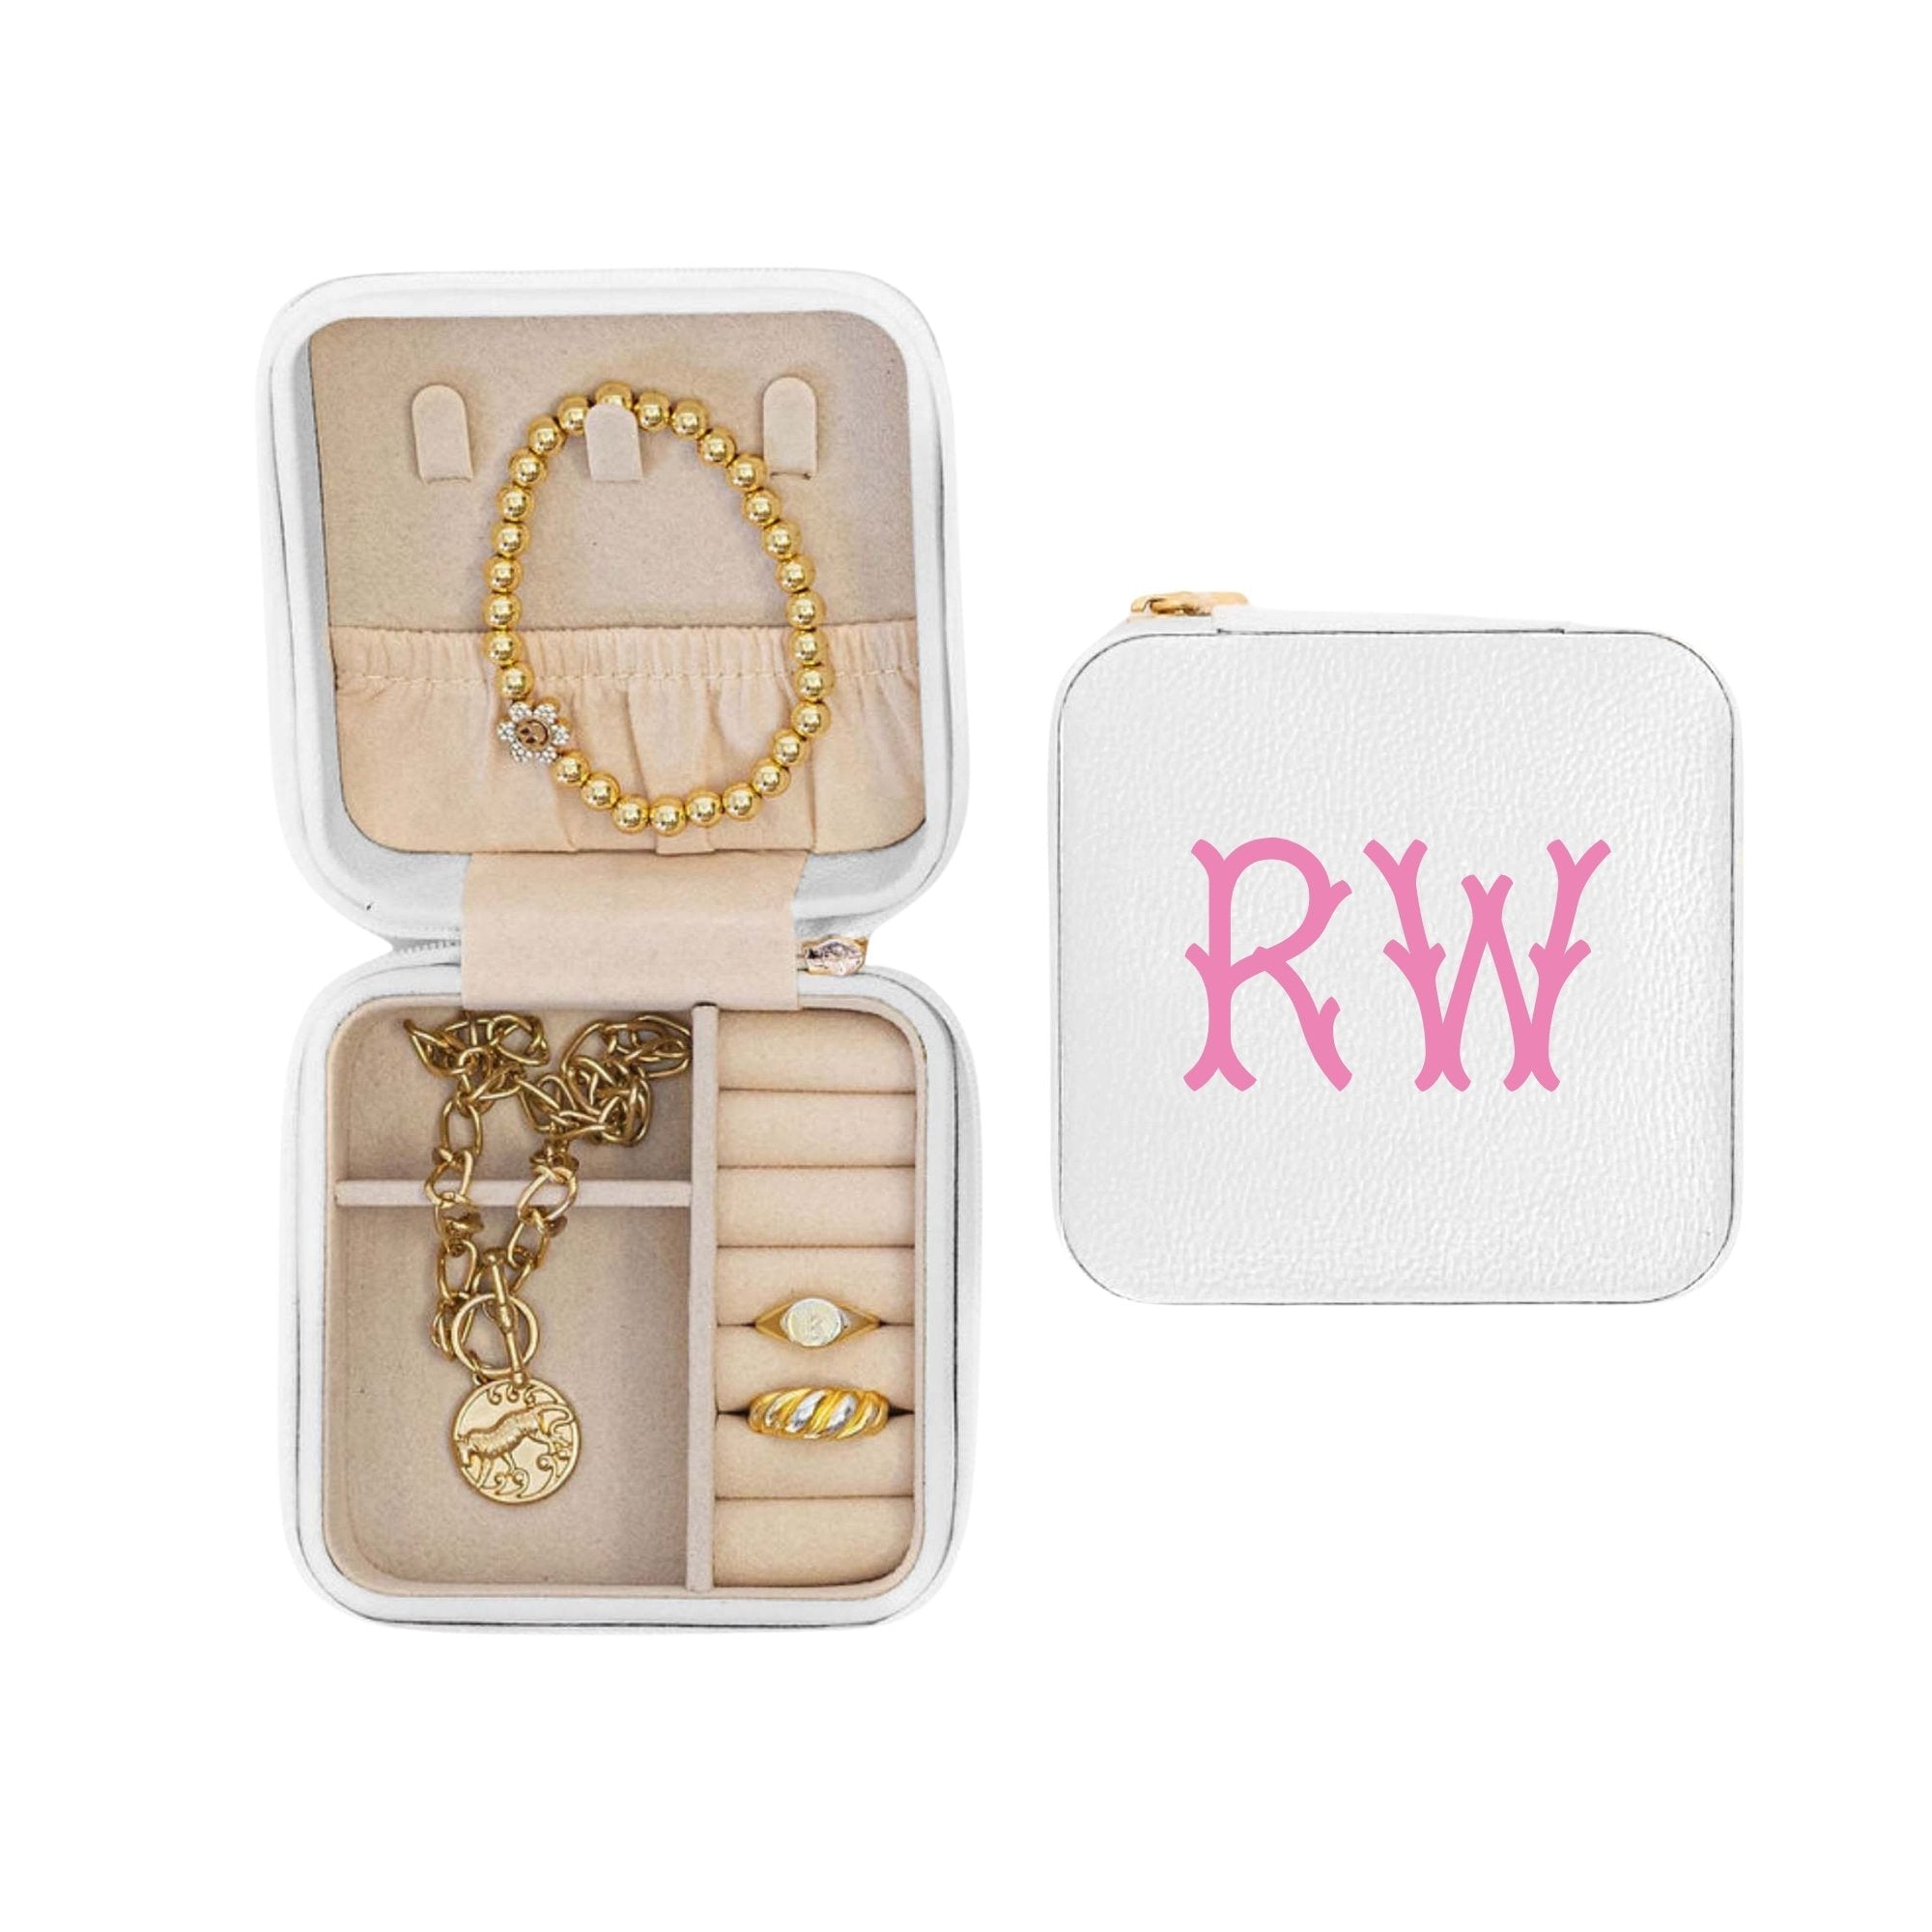 A white monogrammed jewelry case featuring our custom fishtail monogram and showing the storage on the inside.